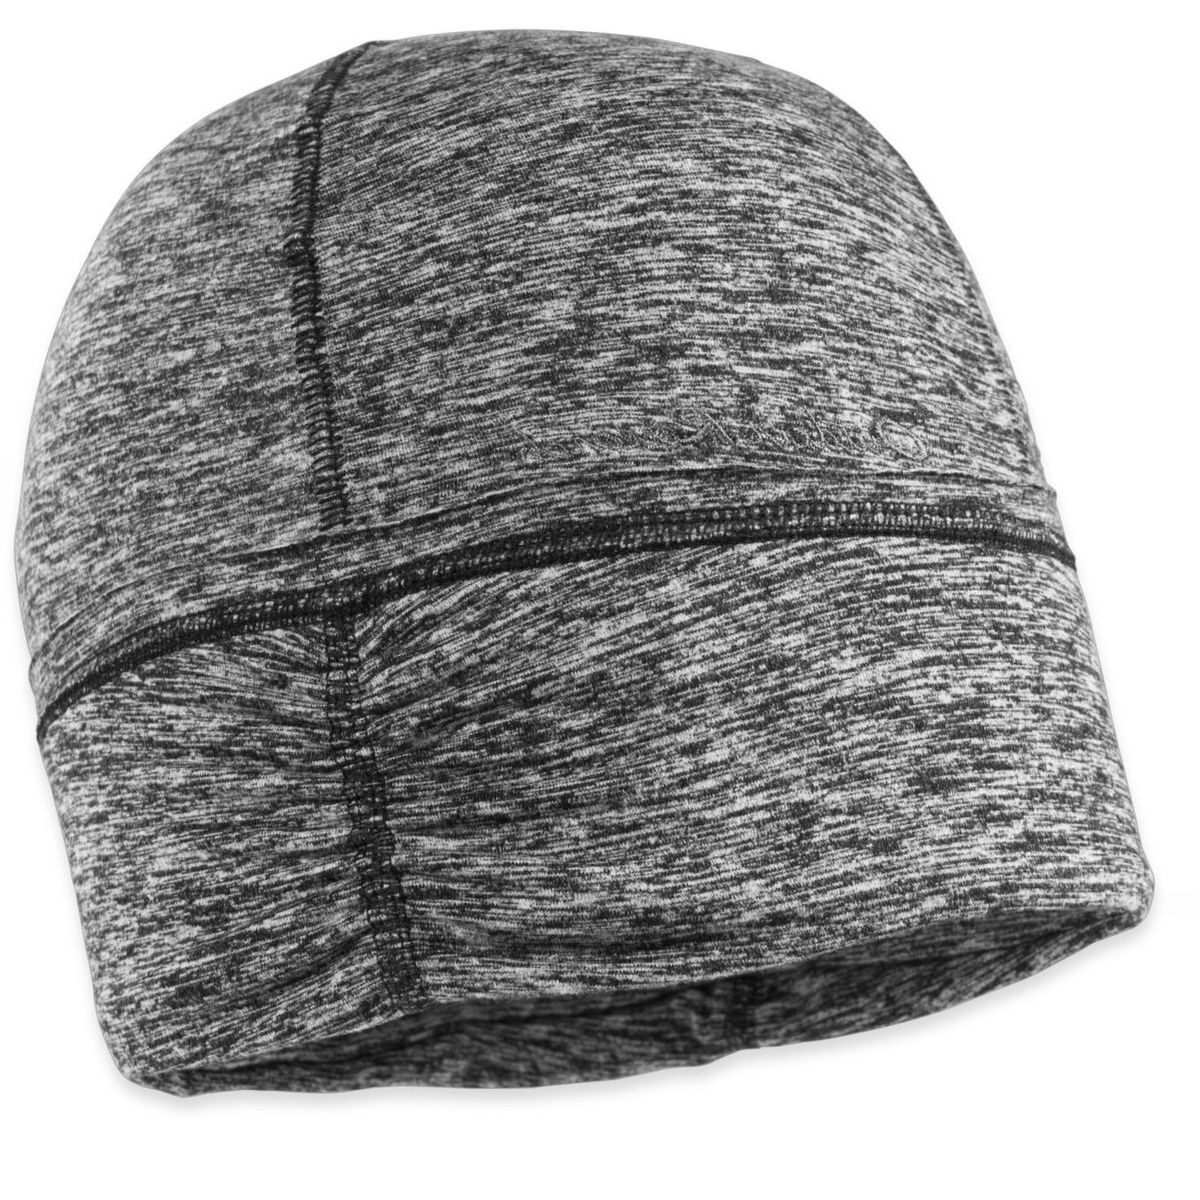 Outdoor Research Melody Beanie - Women's